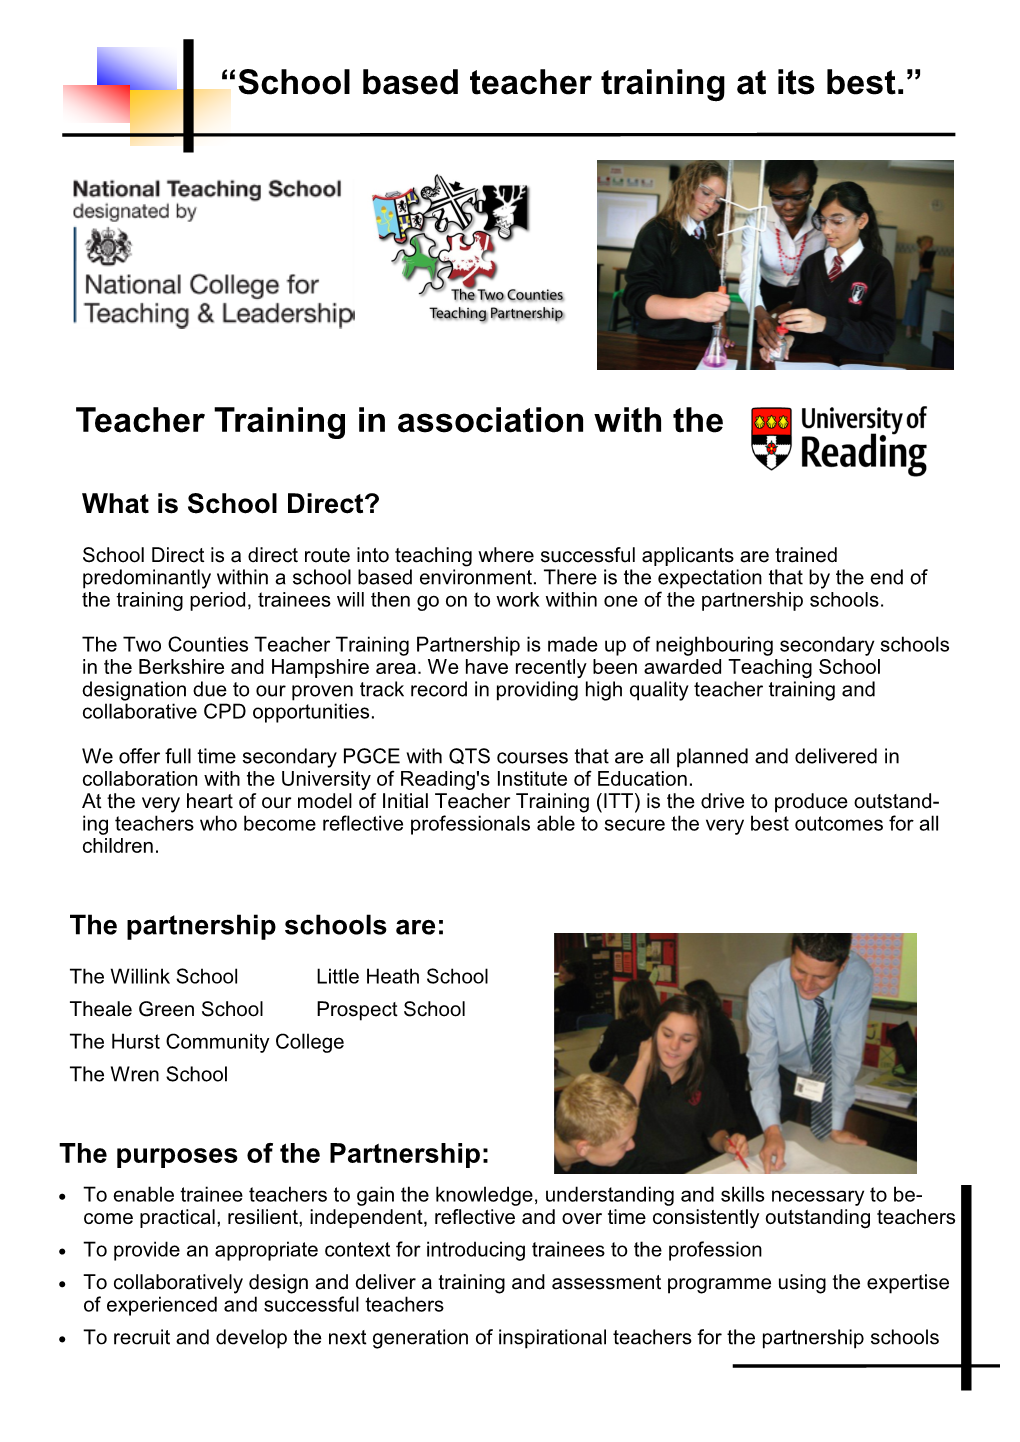 Teacher Training in Association with The